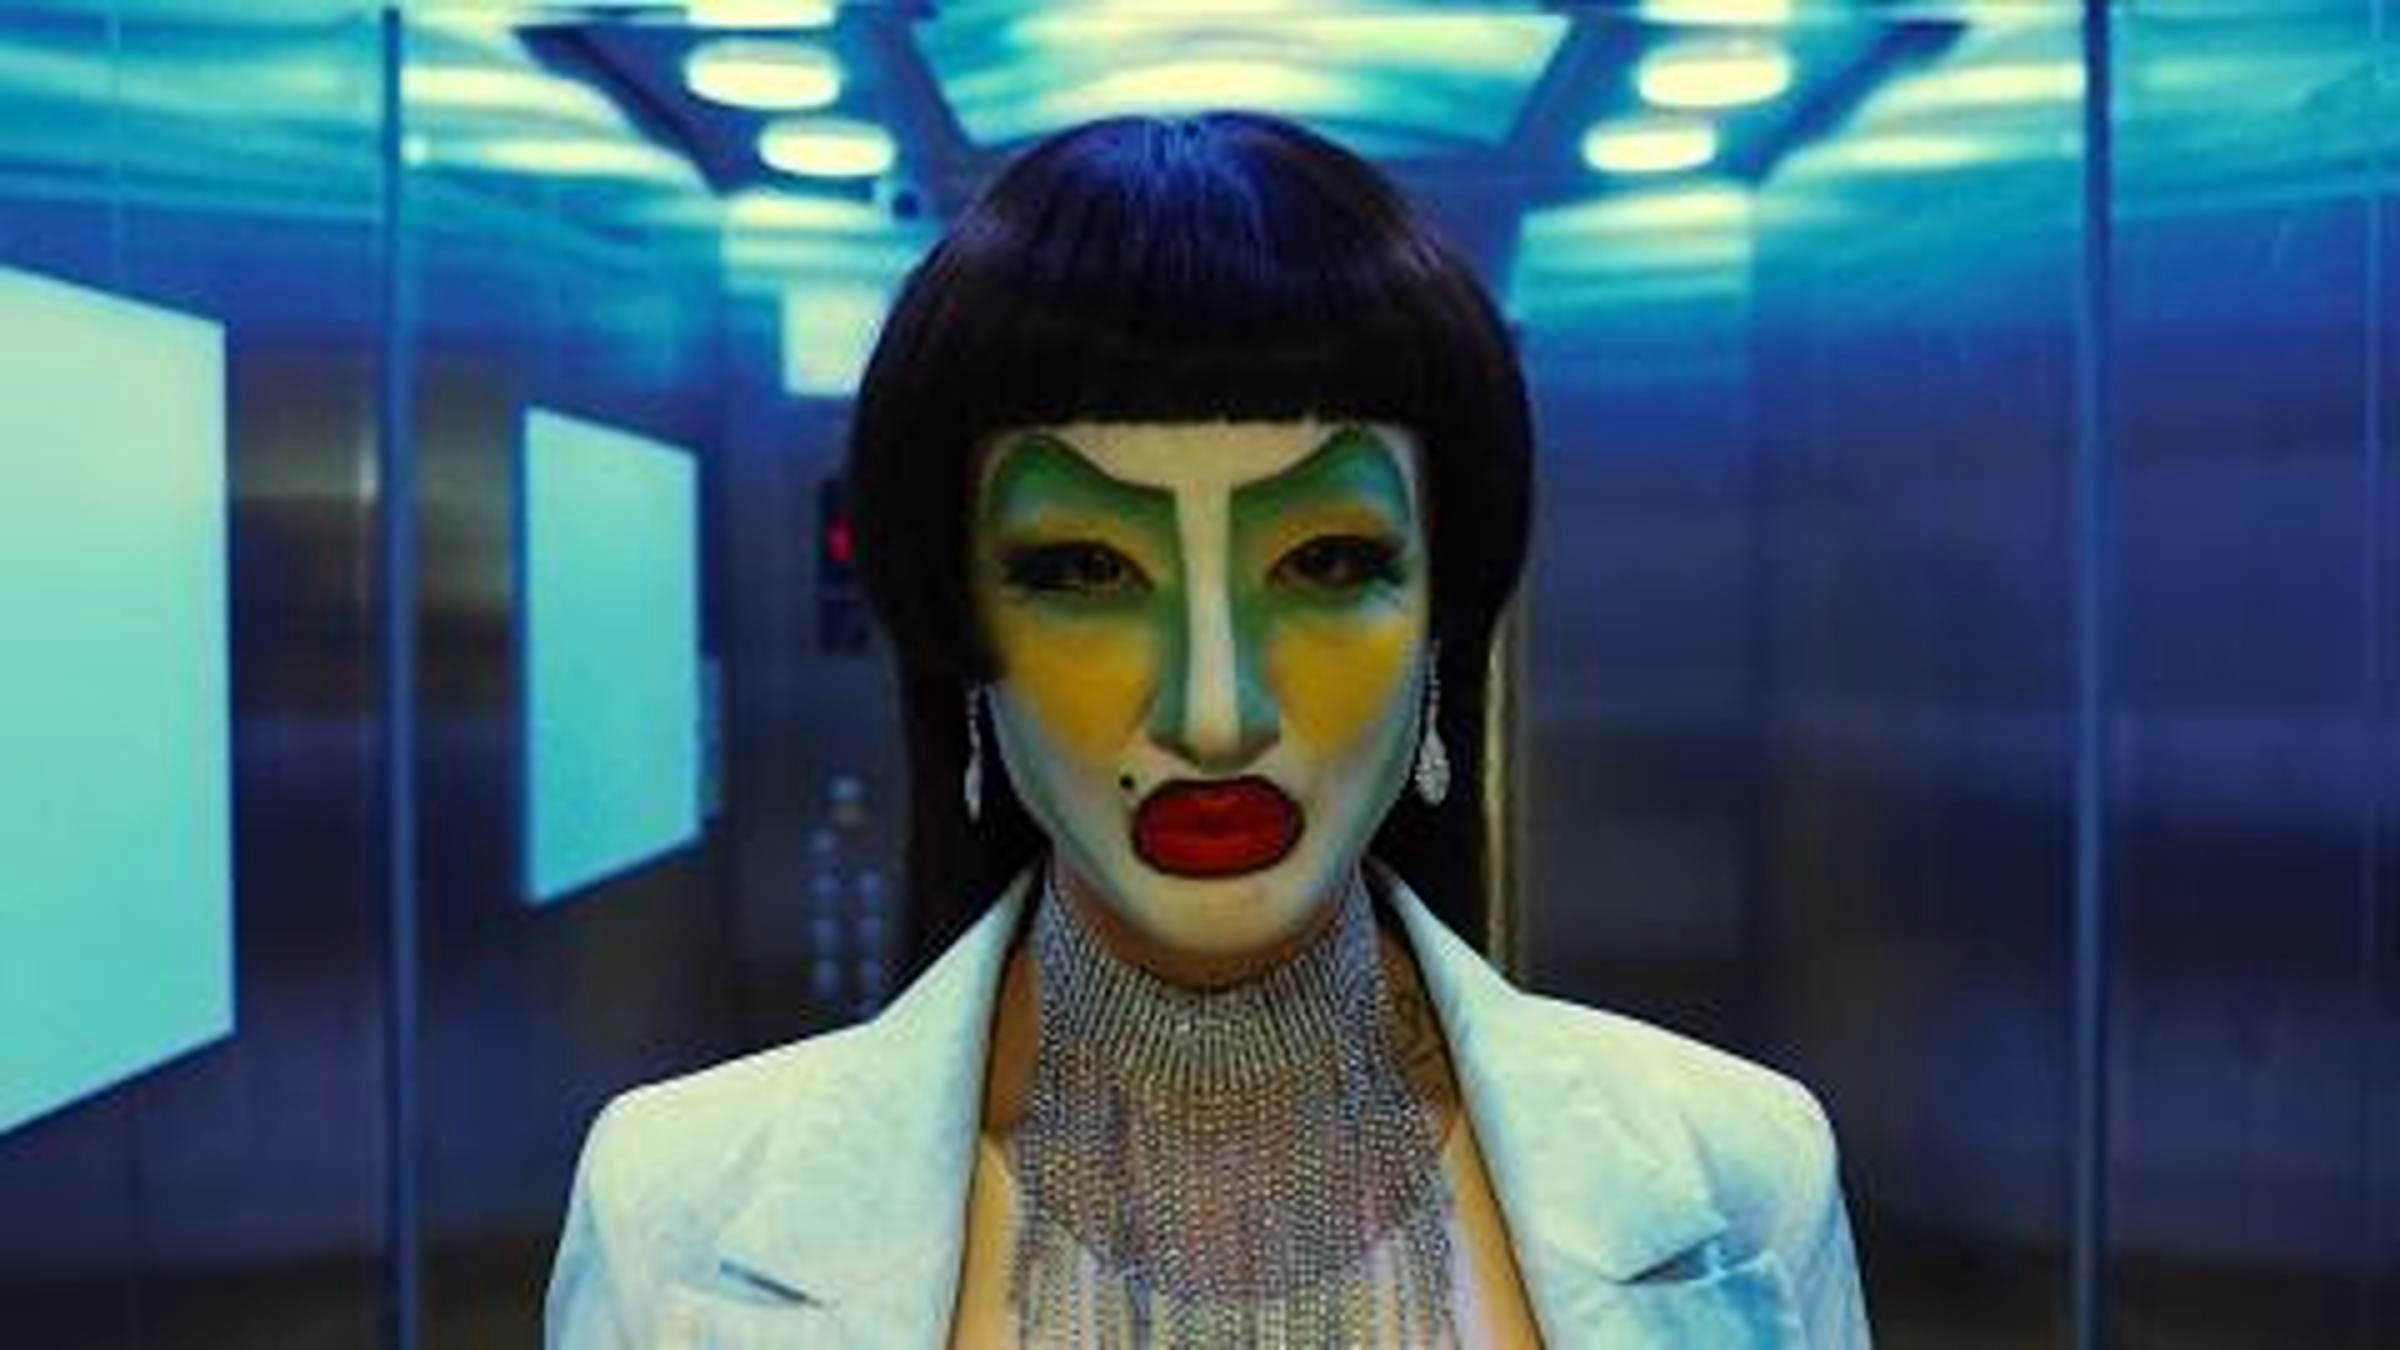 Image of a person looking directly at the camera wearing red lipstick and green and yellow face make up. The person is in a lift.